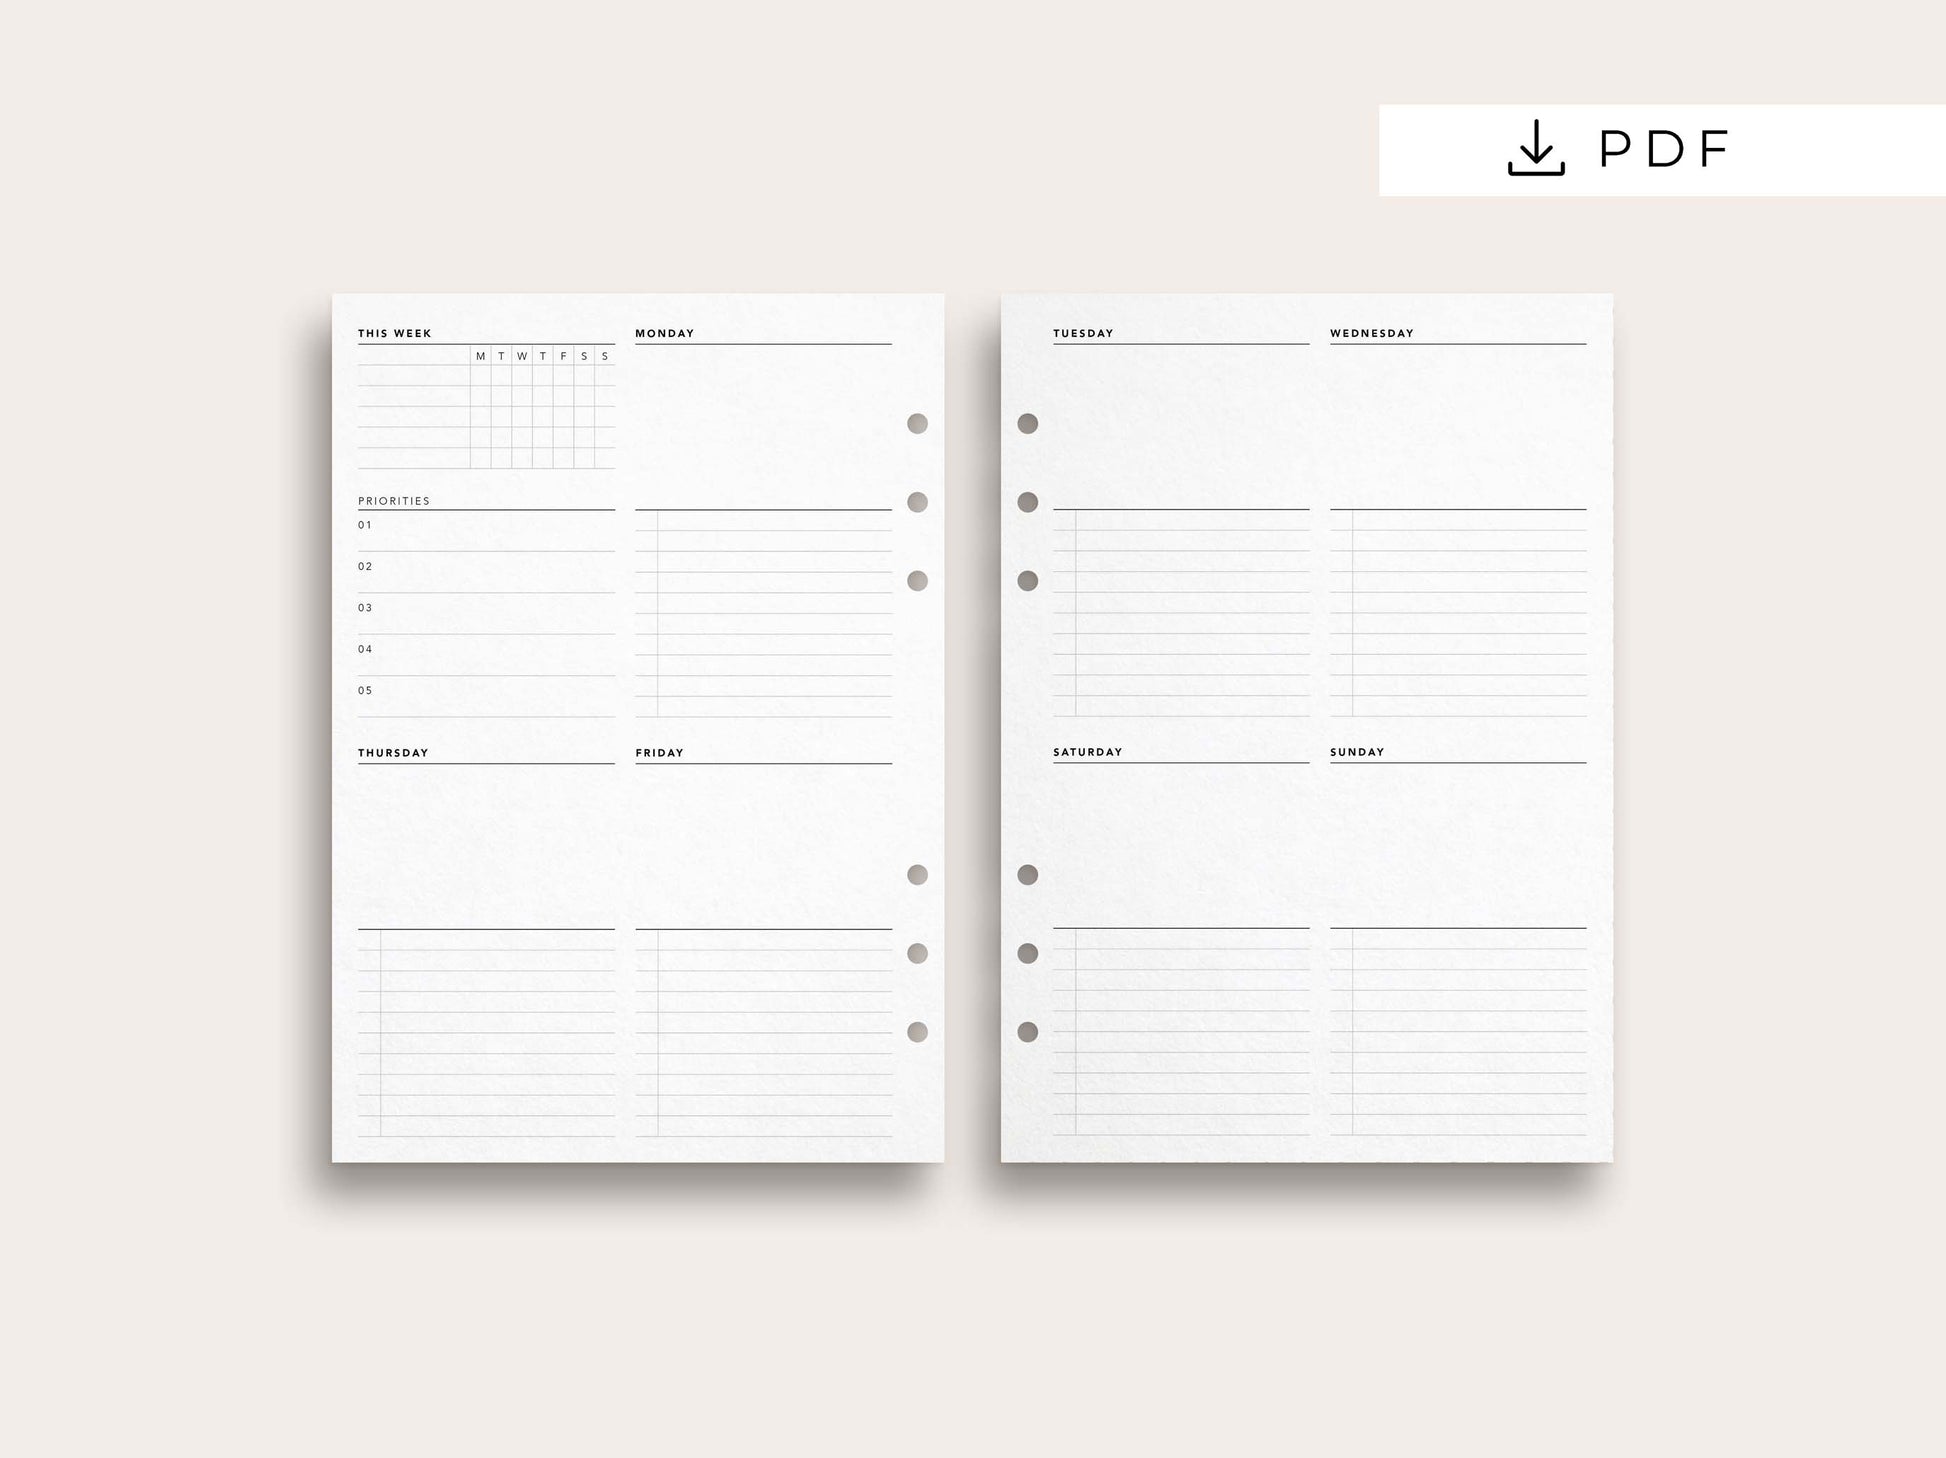 Printable Weekly Planner No. 2 – Puffin Pages Co